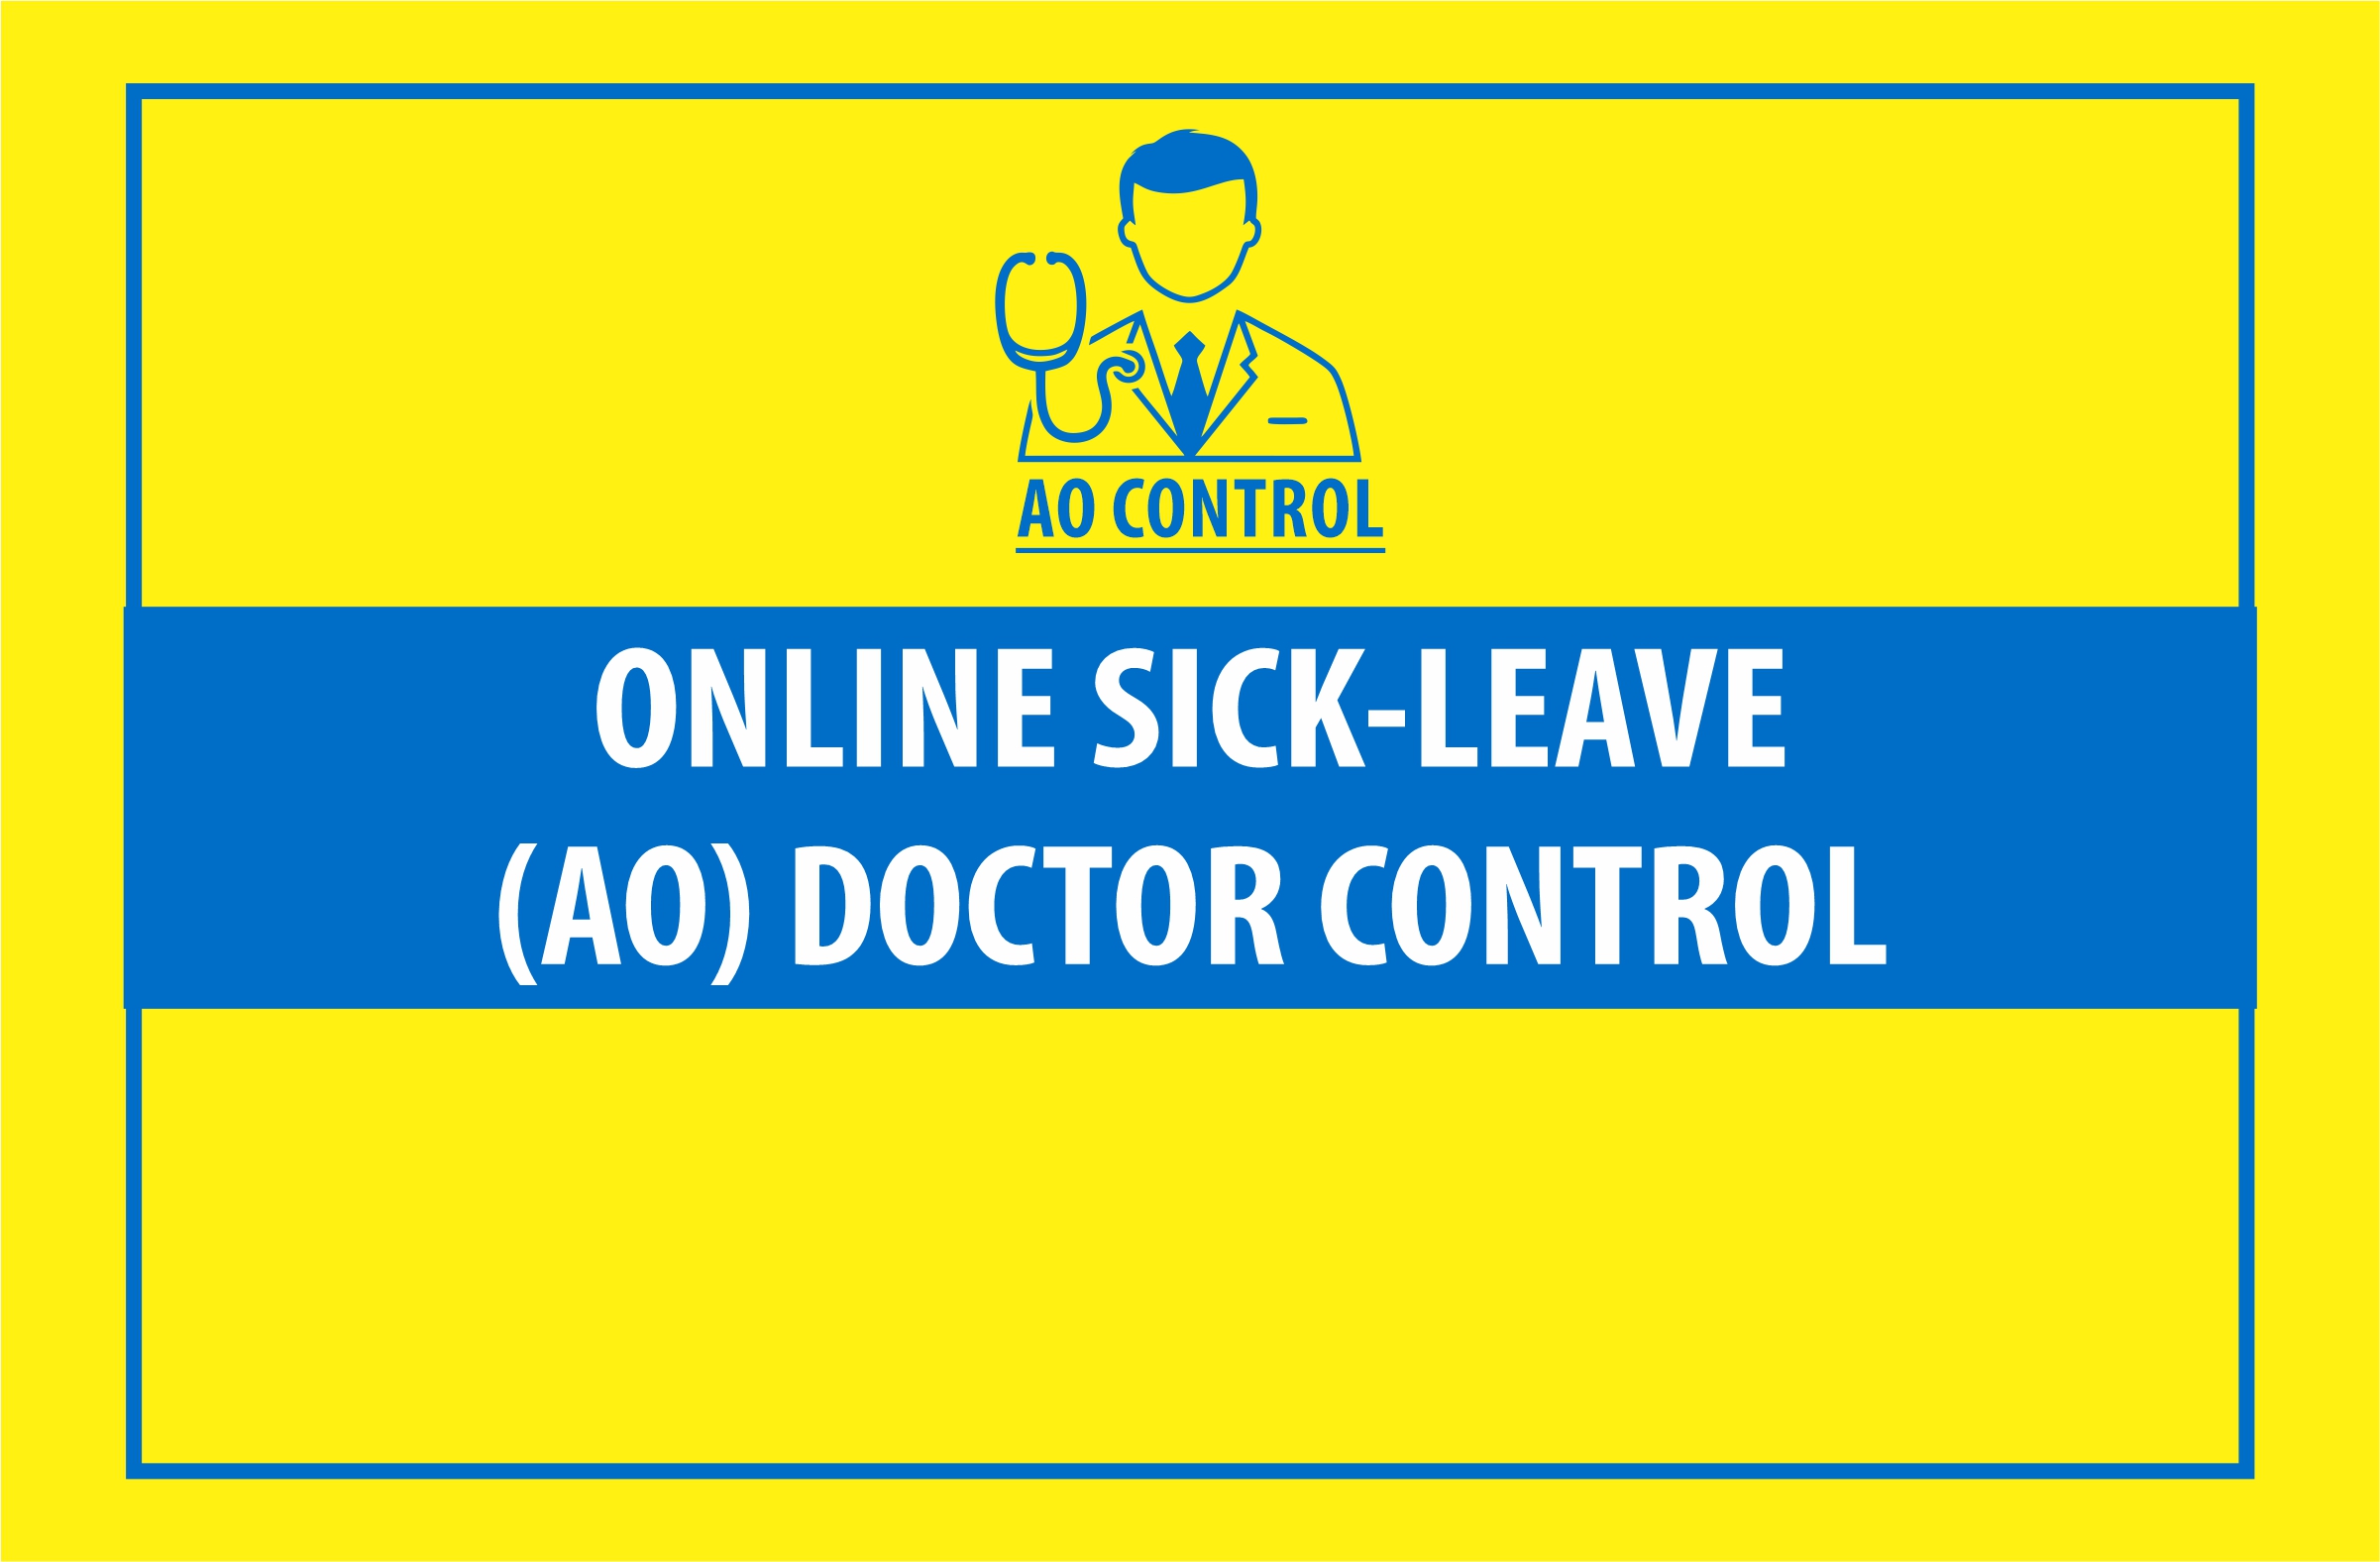 AO control: Report for sick-leave control online 